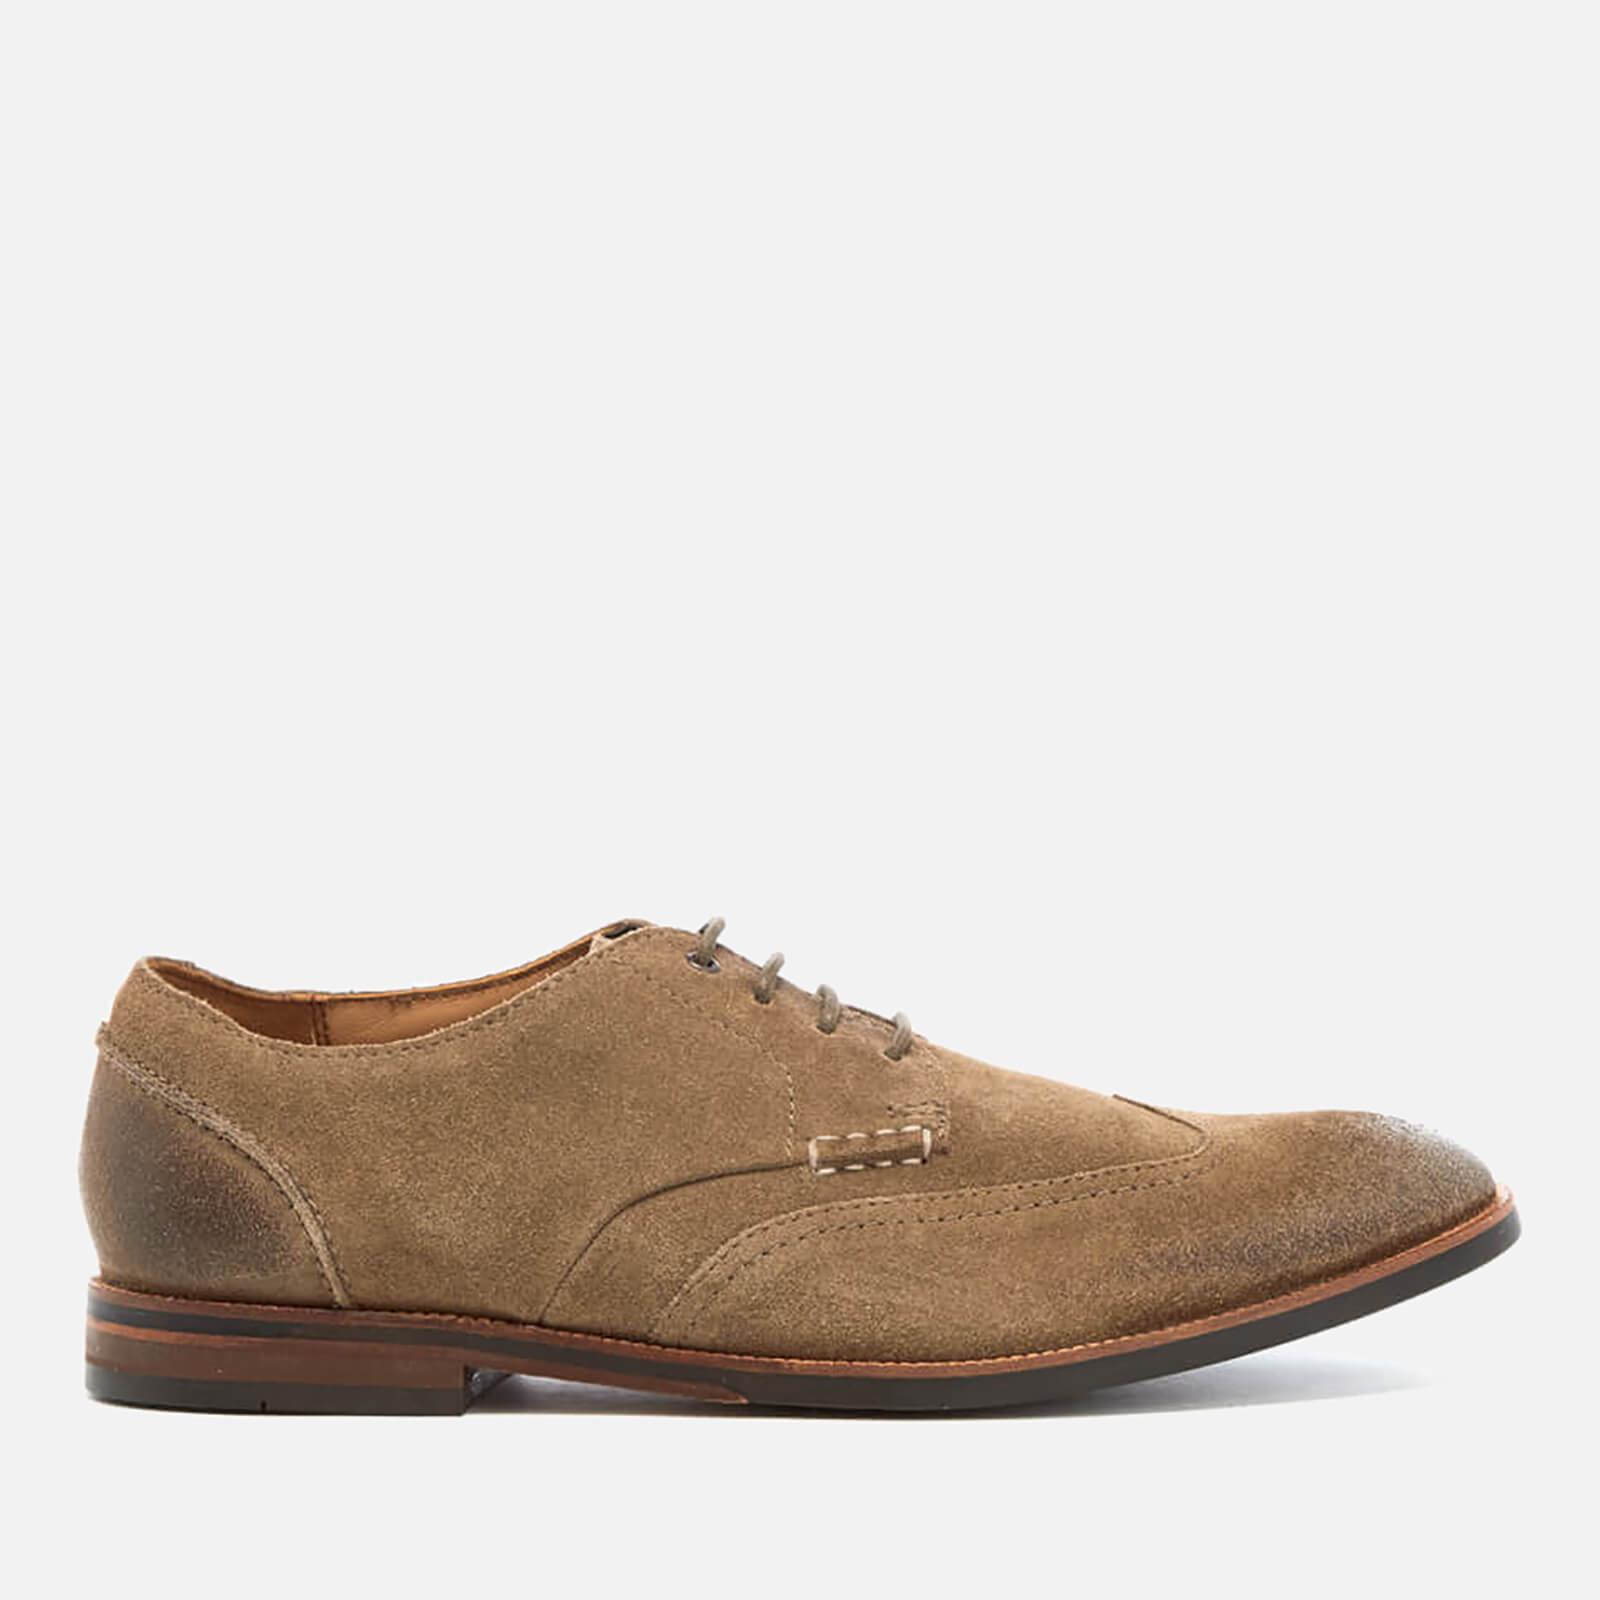 Clarks Broyd Wing Suede Derby Shoes in Beige (Natural) for Men - Lyst